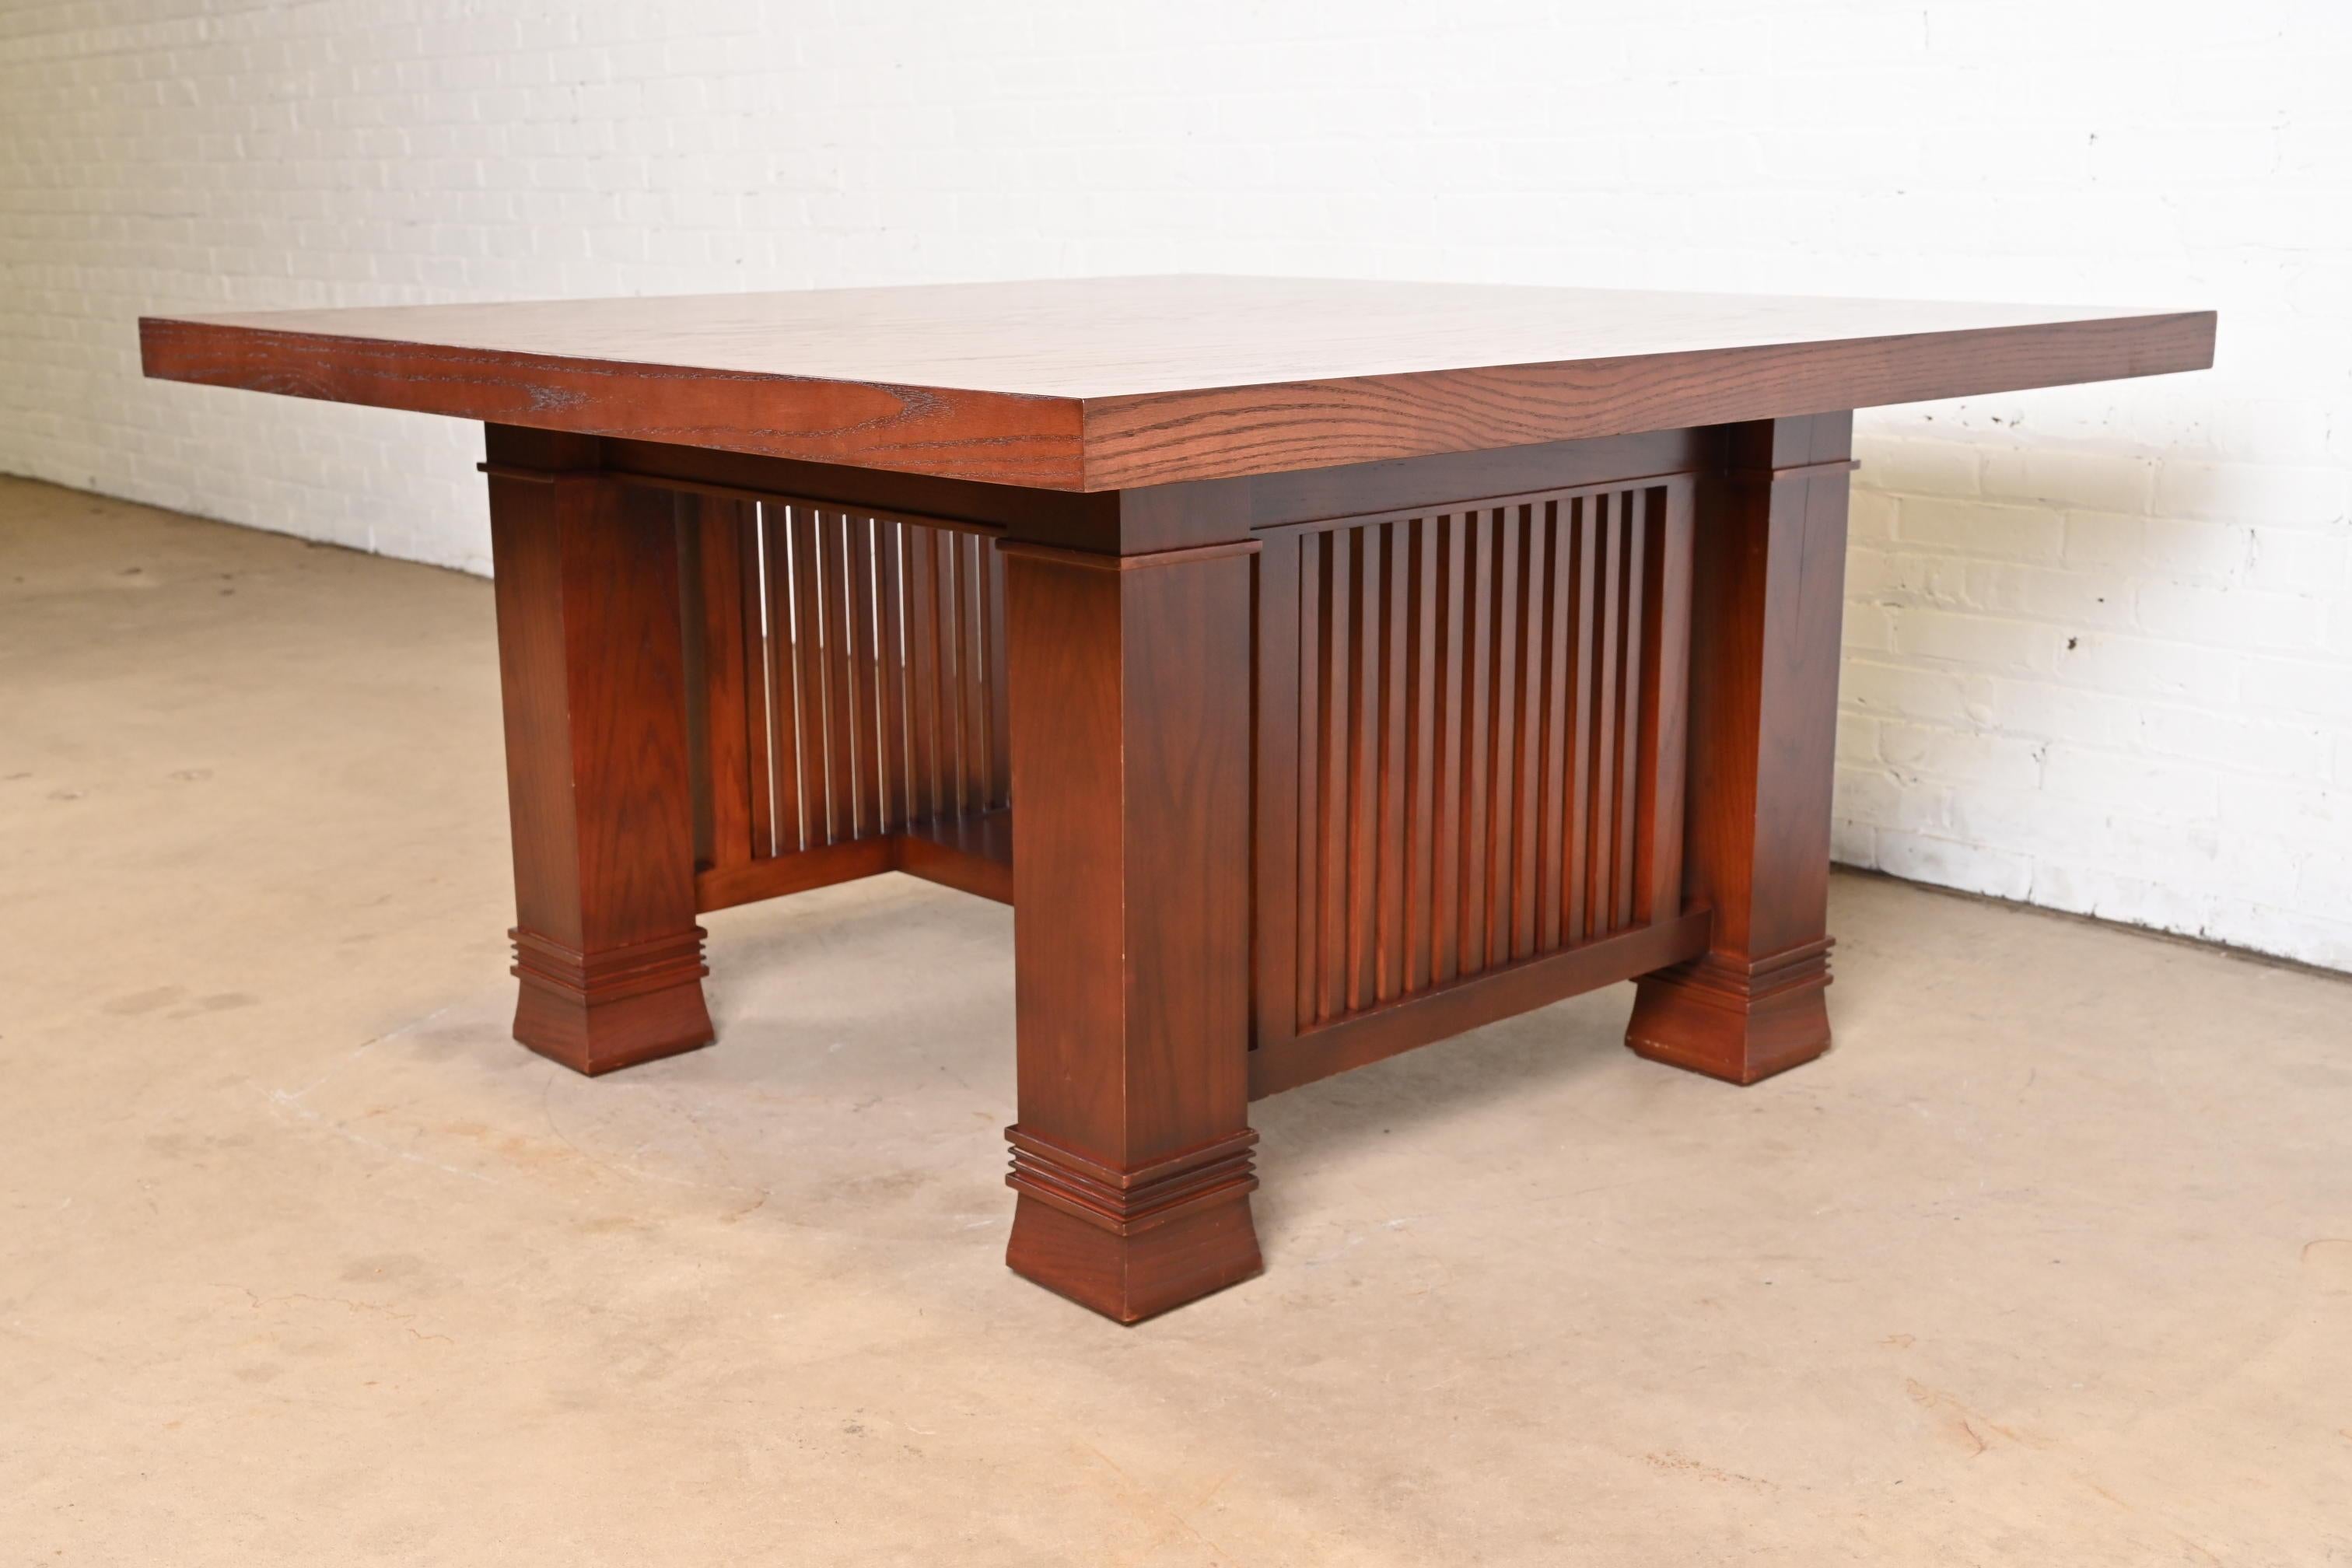 An exceptional Mission or Arts & Crafts style oak dining table or breakfast table

In the manner of Frank Lloyd Wright

By J.B. Van Sciver Co.

USA, Circa Mid-20th Century

Measures: 54